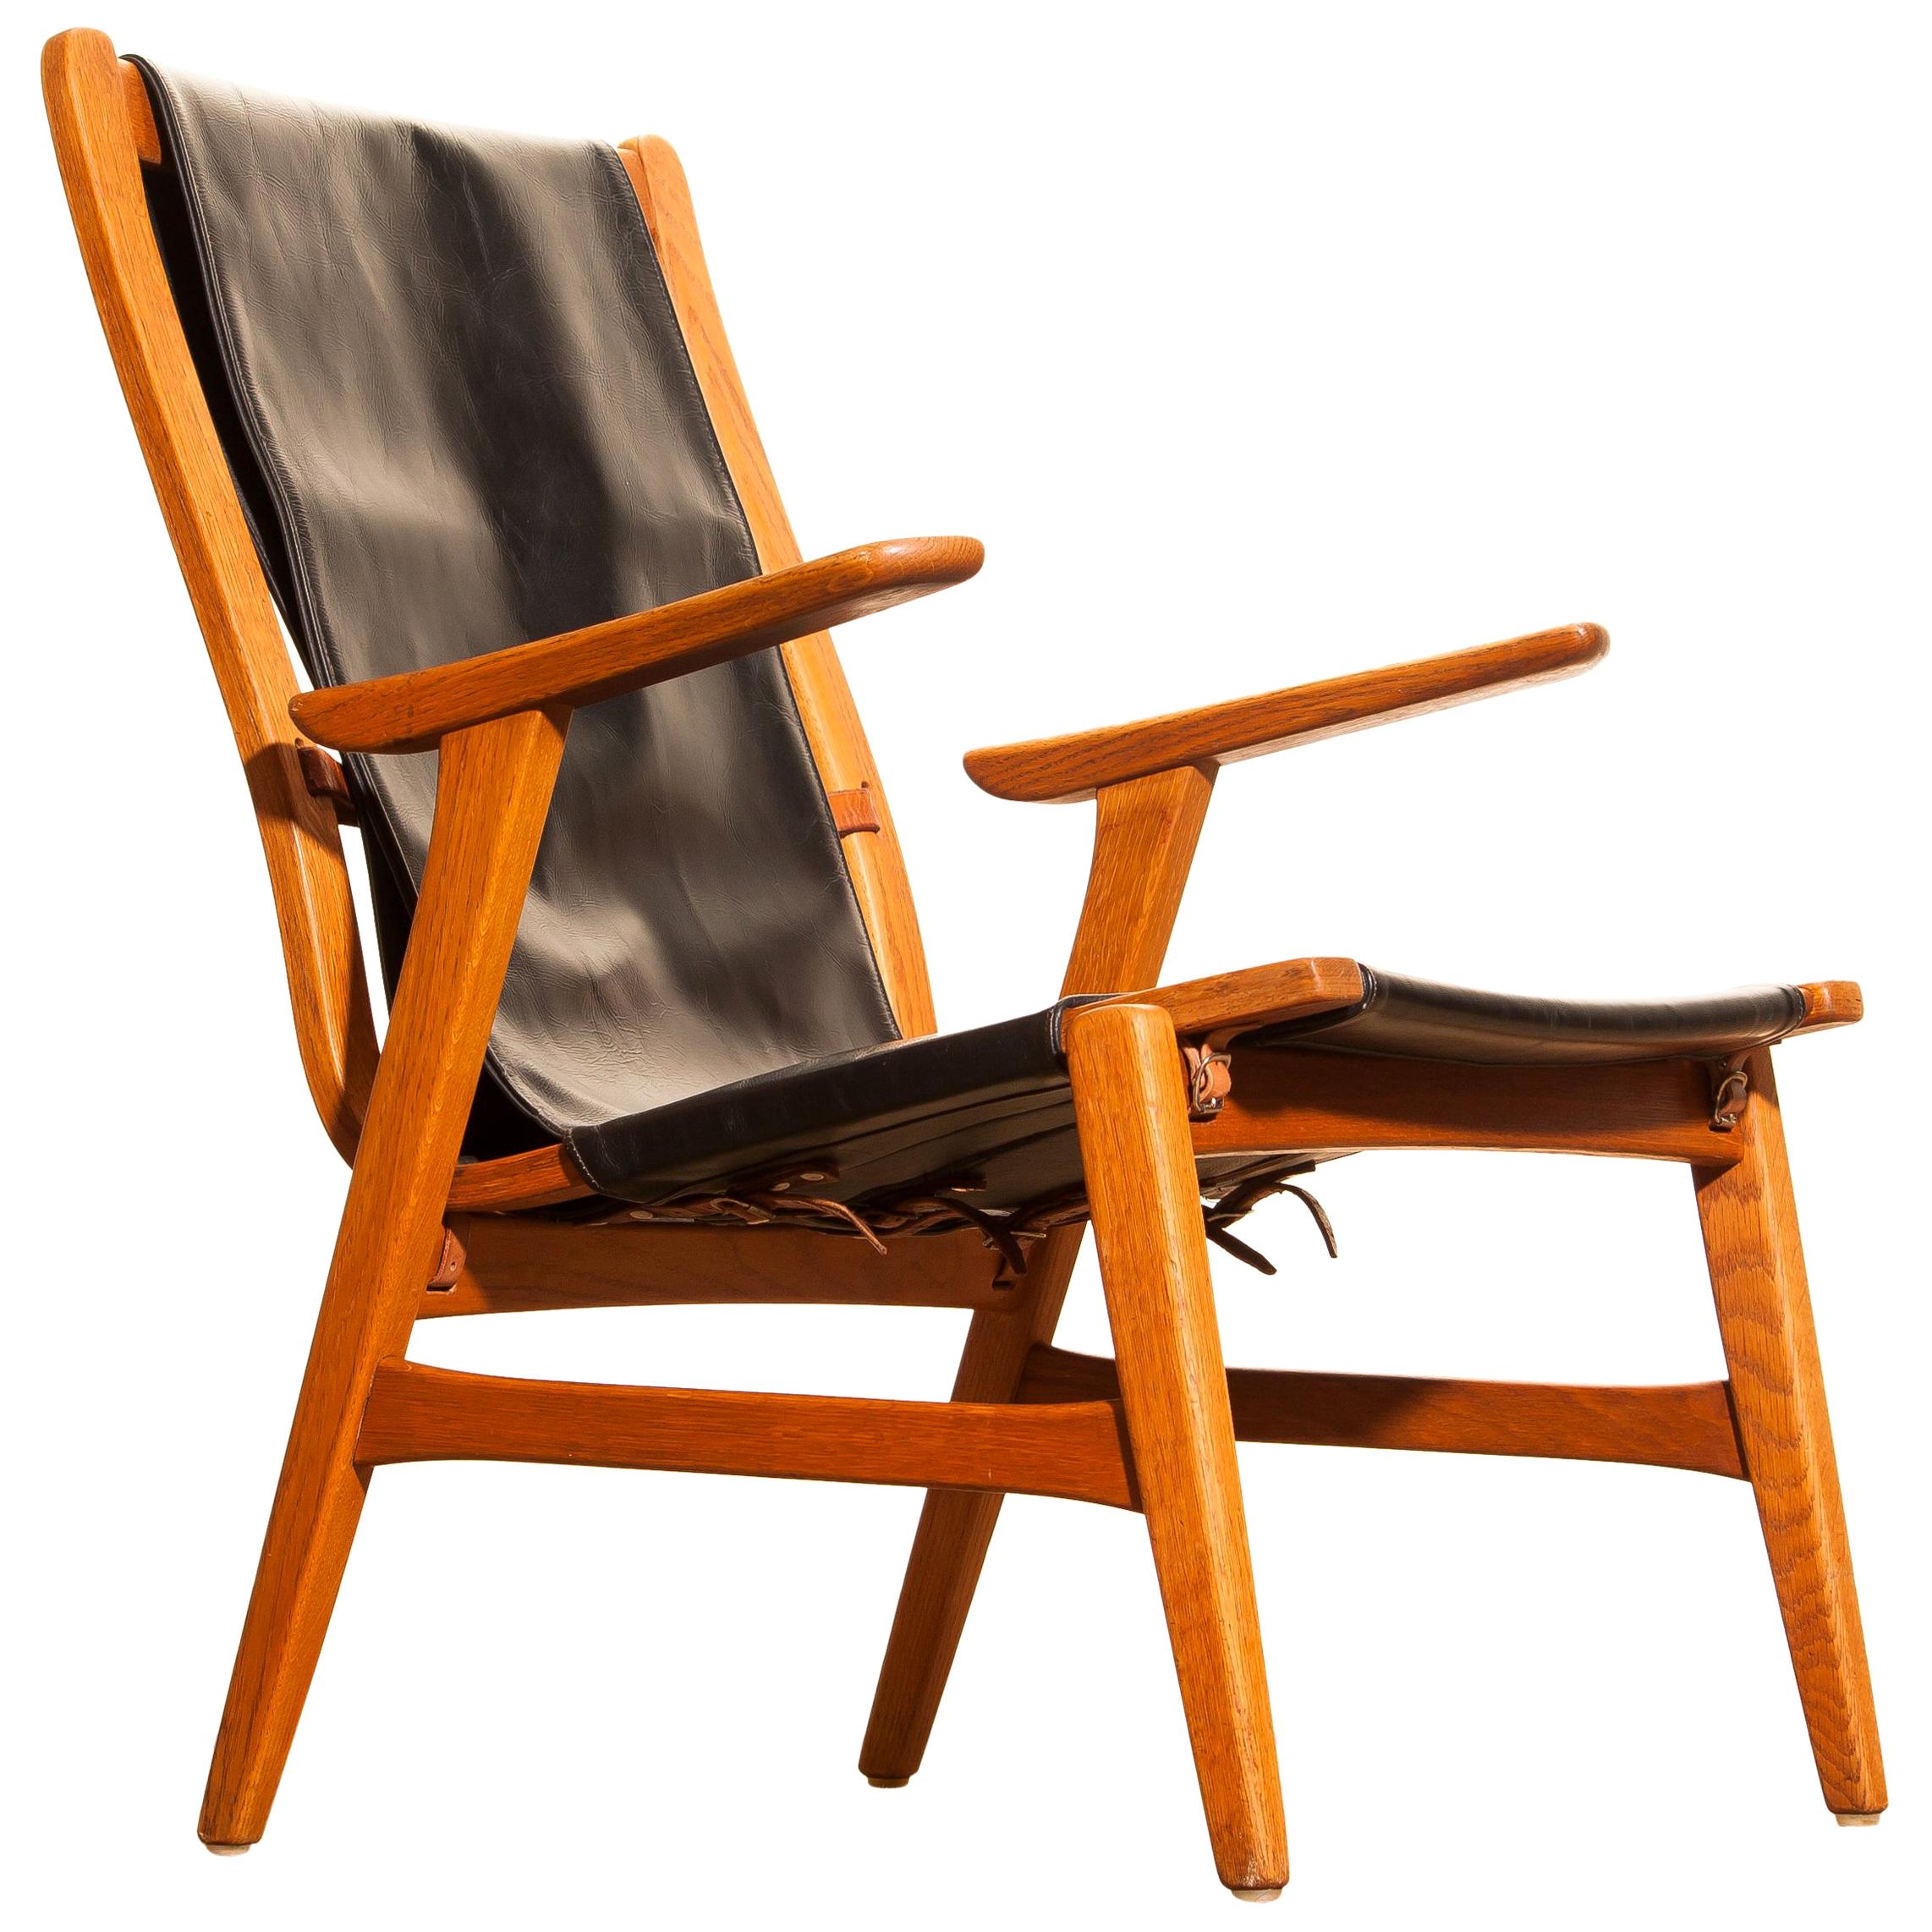 Wonderful hunting chair 'Ulrika' designed by Östen Kristiansson for Vittsjö, Sweden.
This beautiful chair is made of an oak frame with a black leatherette seating.
It is in very nice condition,
Period 1950s.
Dimensions: H 82 cm, W 62 cm, D 60